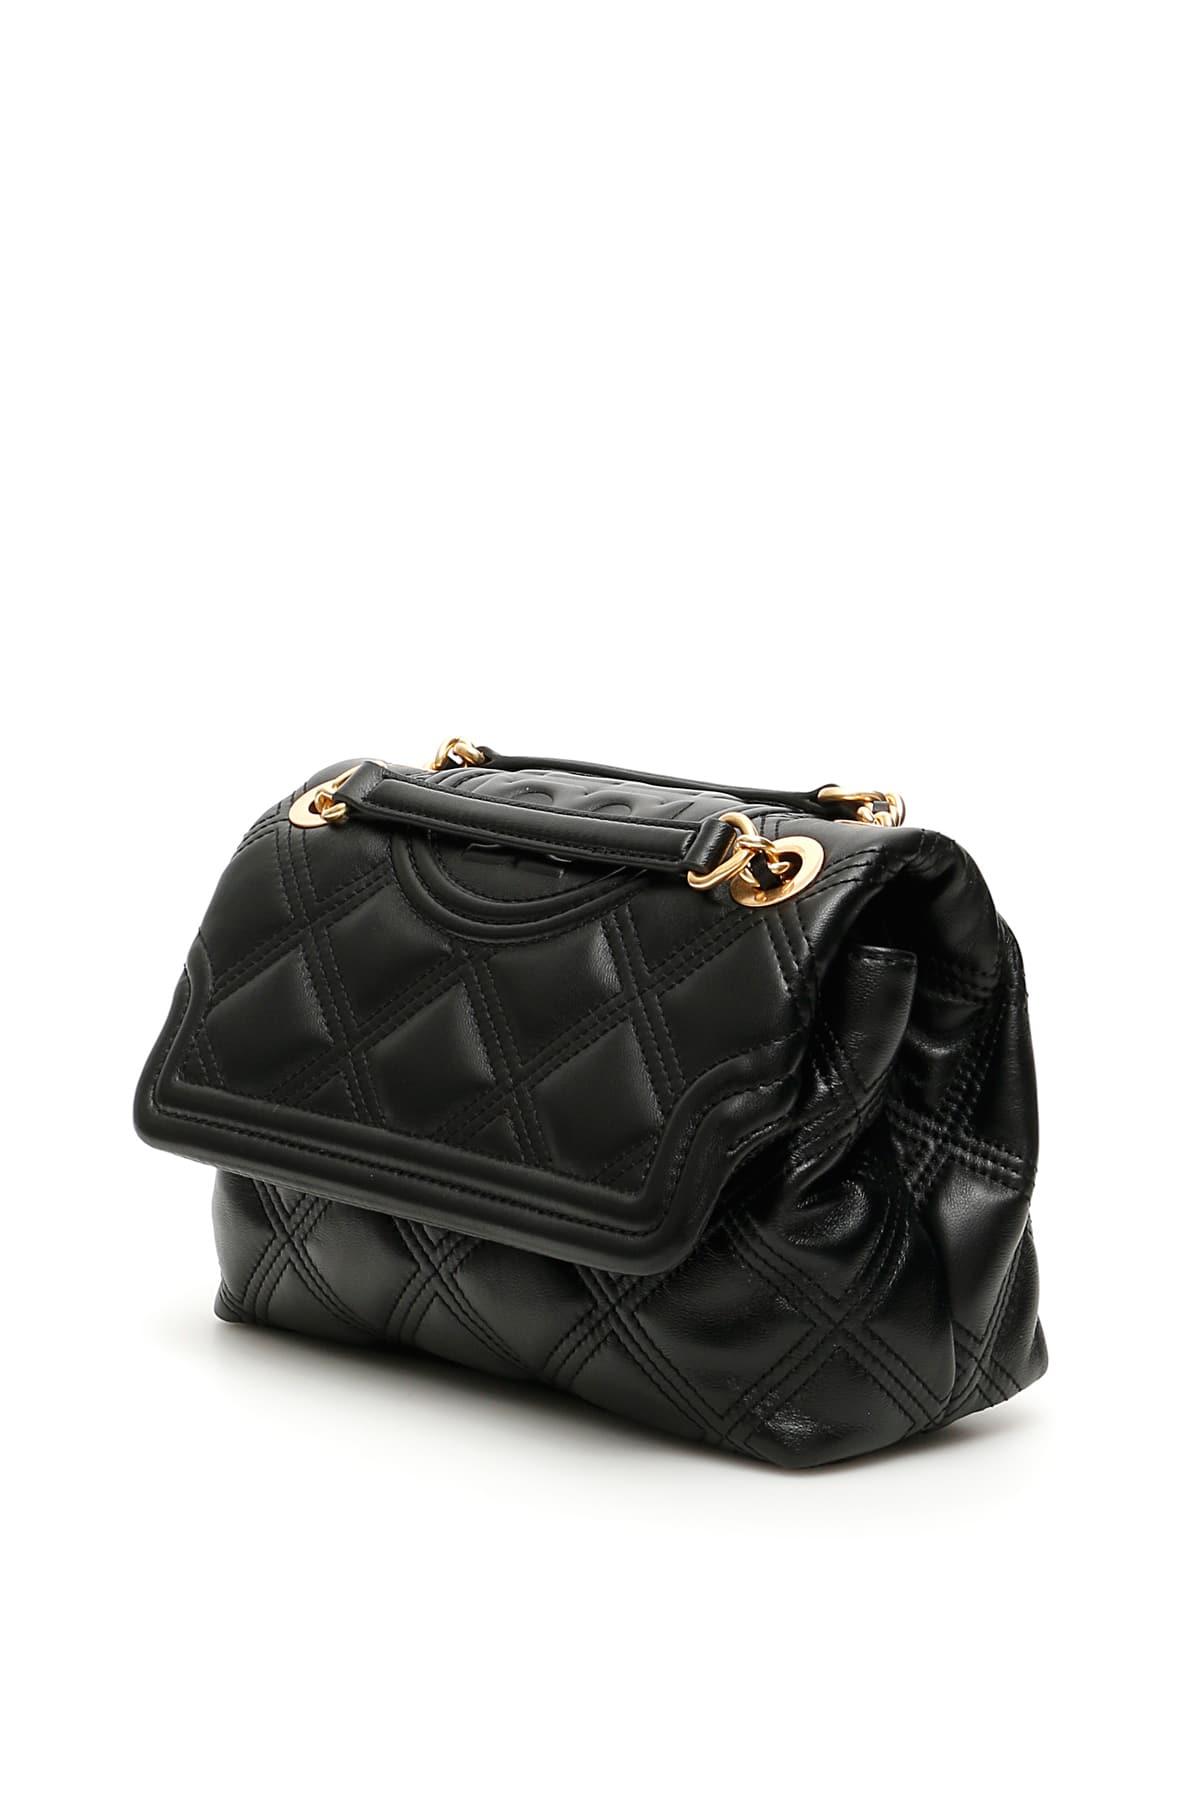 Tory Burch Leather Small Quilted Fleming Soft Bag in Black - Save 9% - Lyst